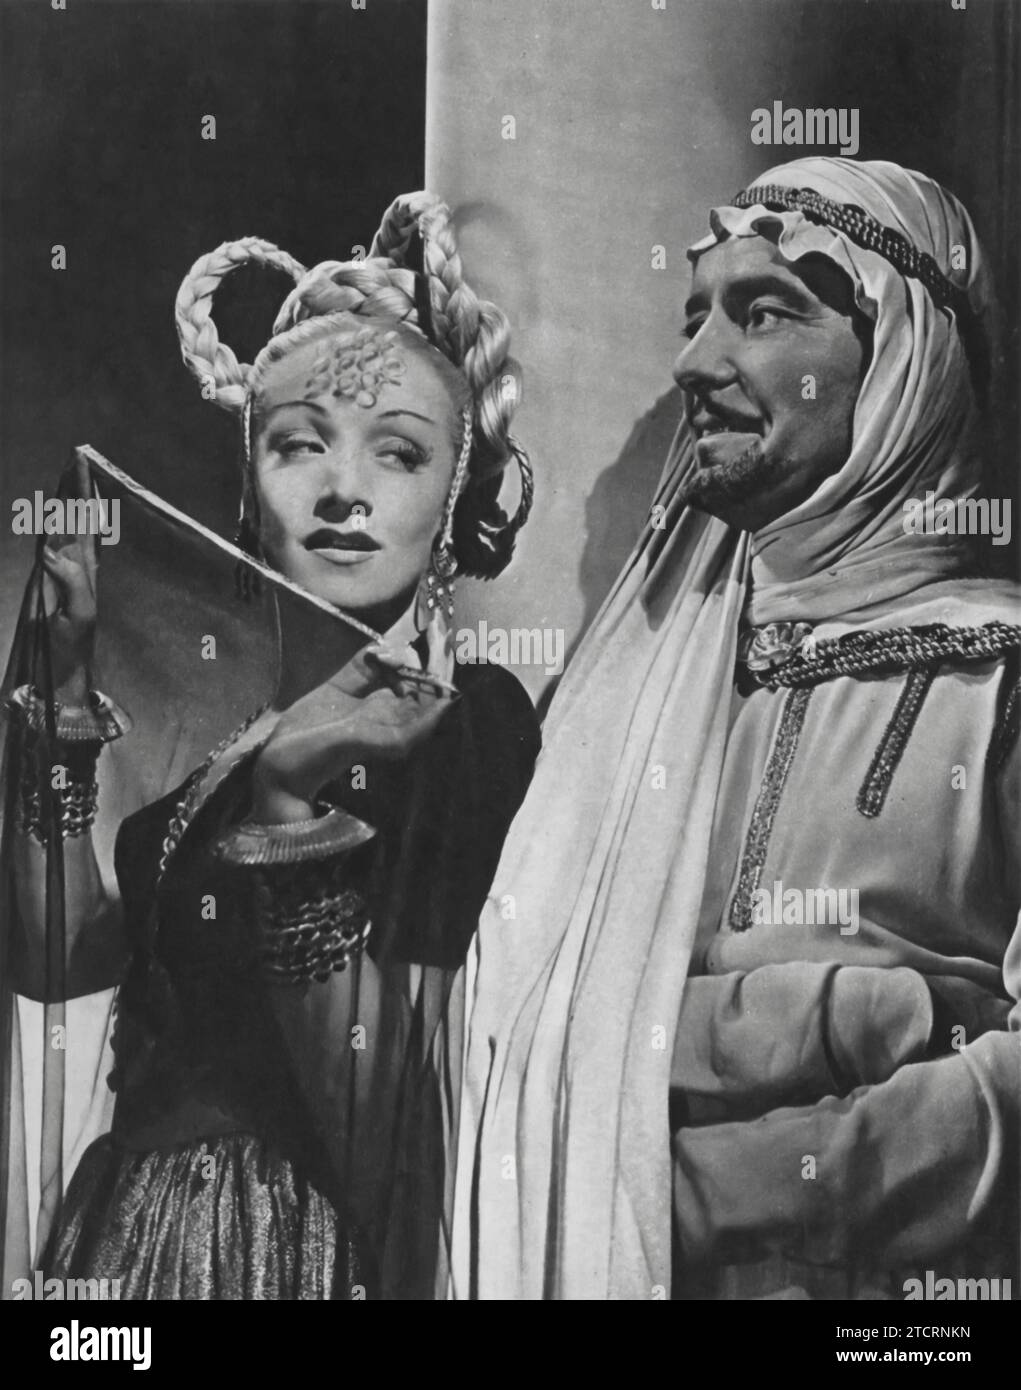 Marlene Dietrich and Ronald Colman starred in 'Kismet' (1944). Colman plays a poet who finds himself in a whirlwind of adventures after a theft. Adapted from a stage musical, 'Kismet' is a blend of drama and romance, showcasing the talents of these Hollywood icons Stock Photo